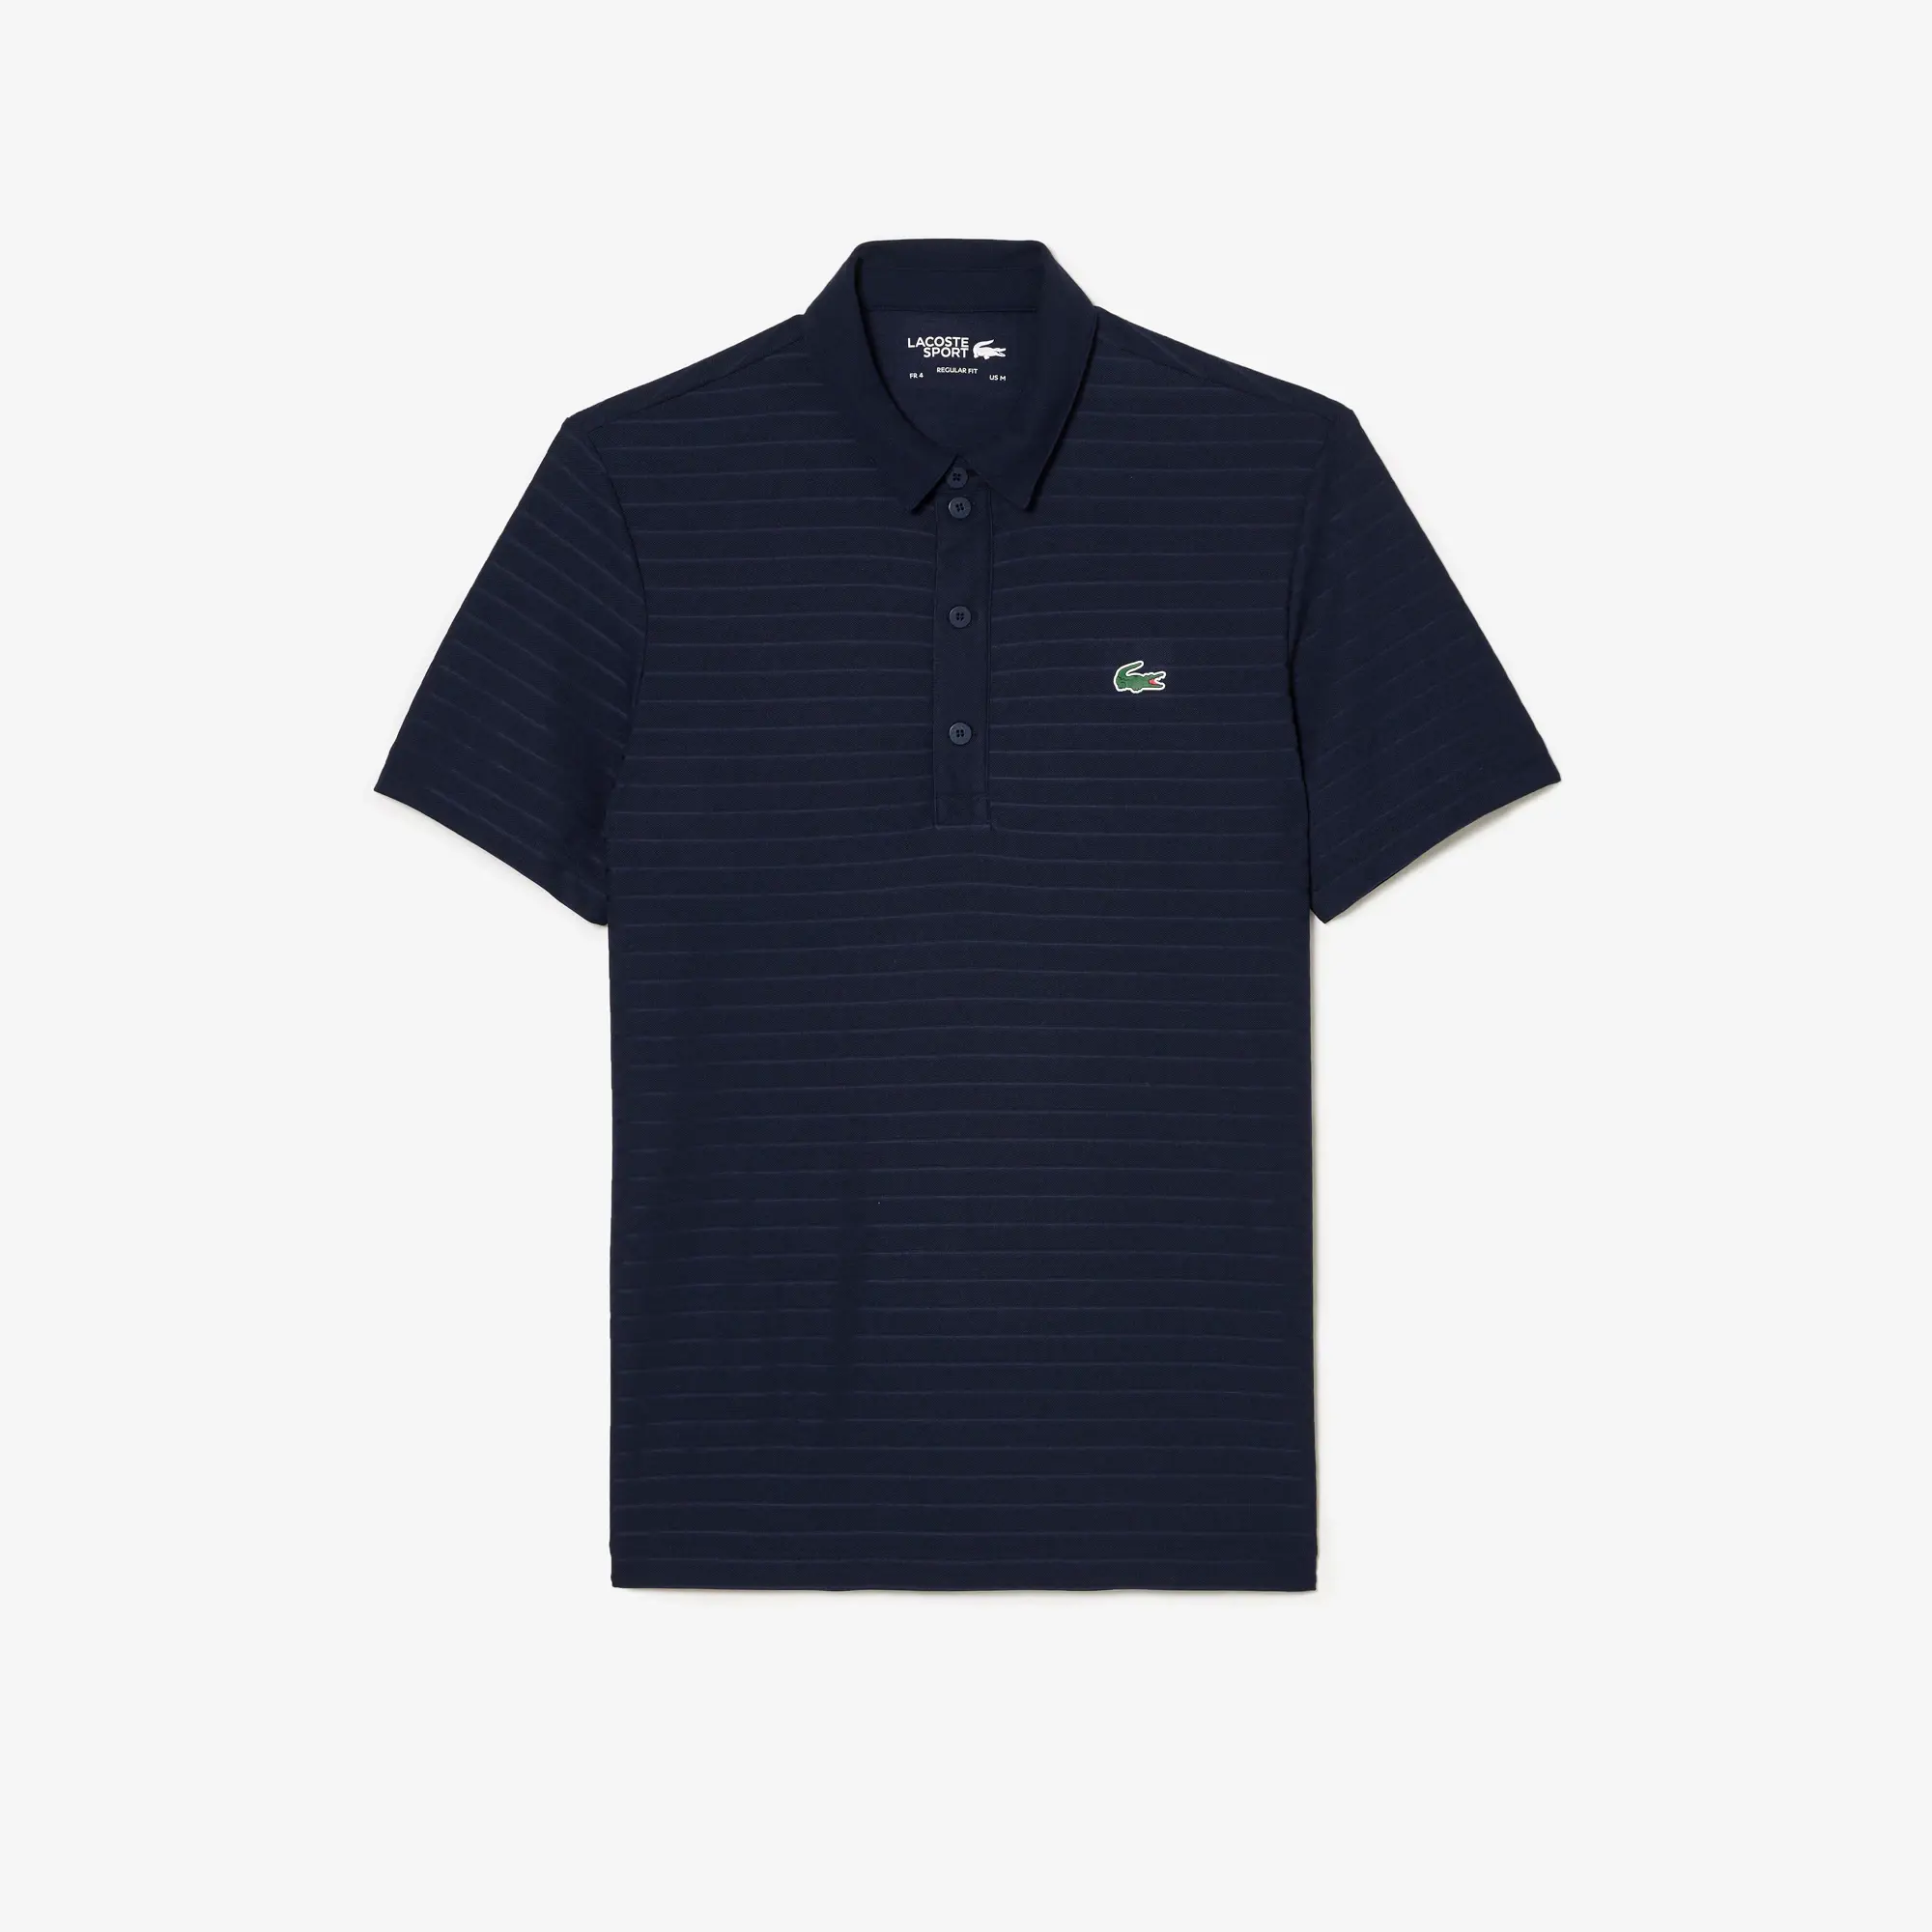 Lacoste Men's SPORT Textured Breathable Golf Polo. 2